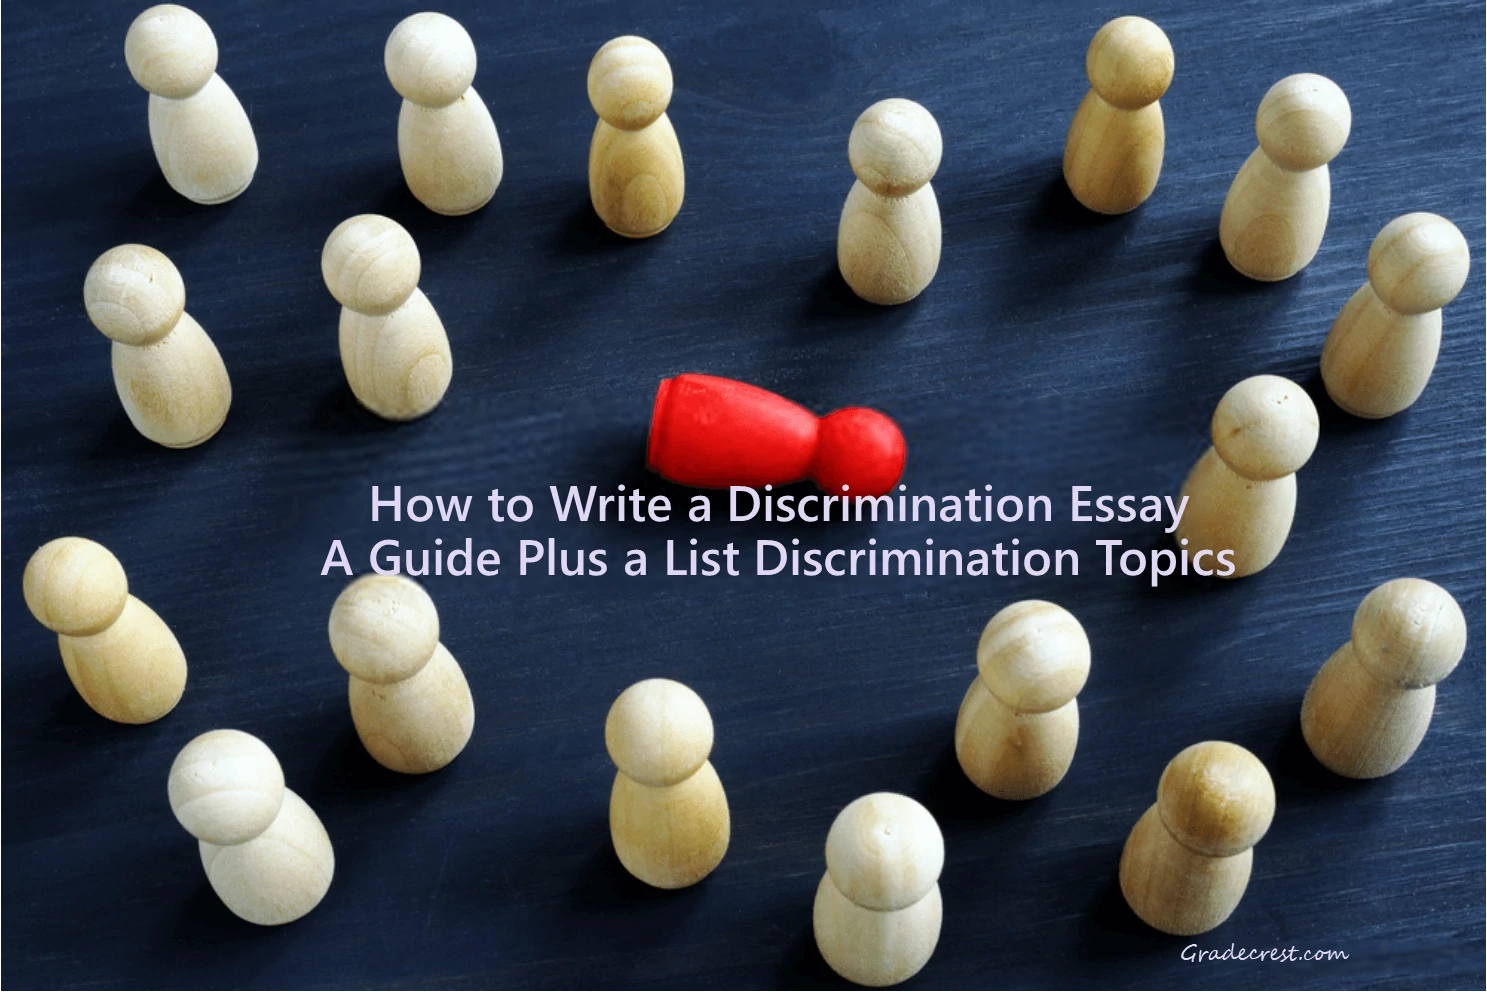 How to write a discrimination Essay or research paper